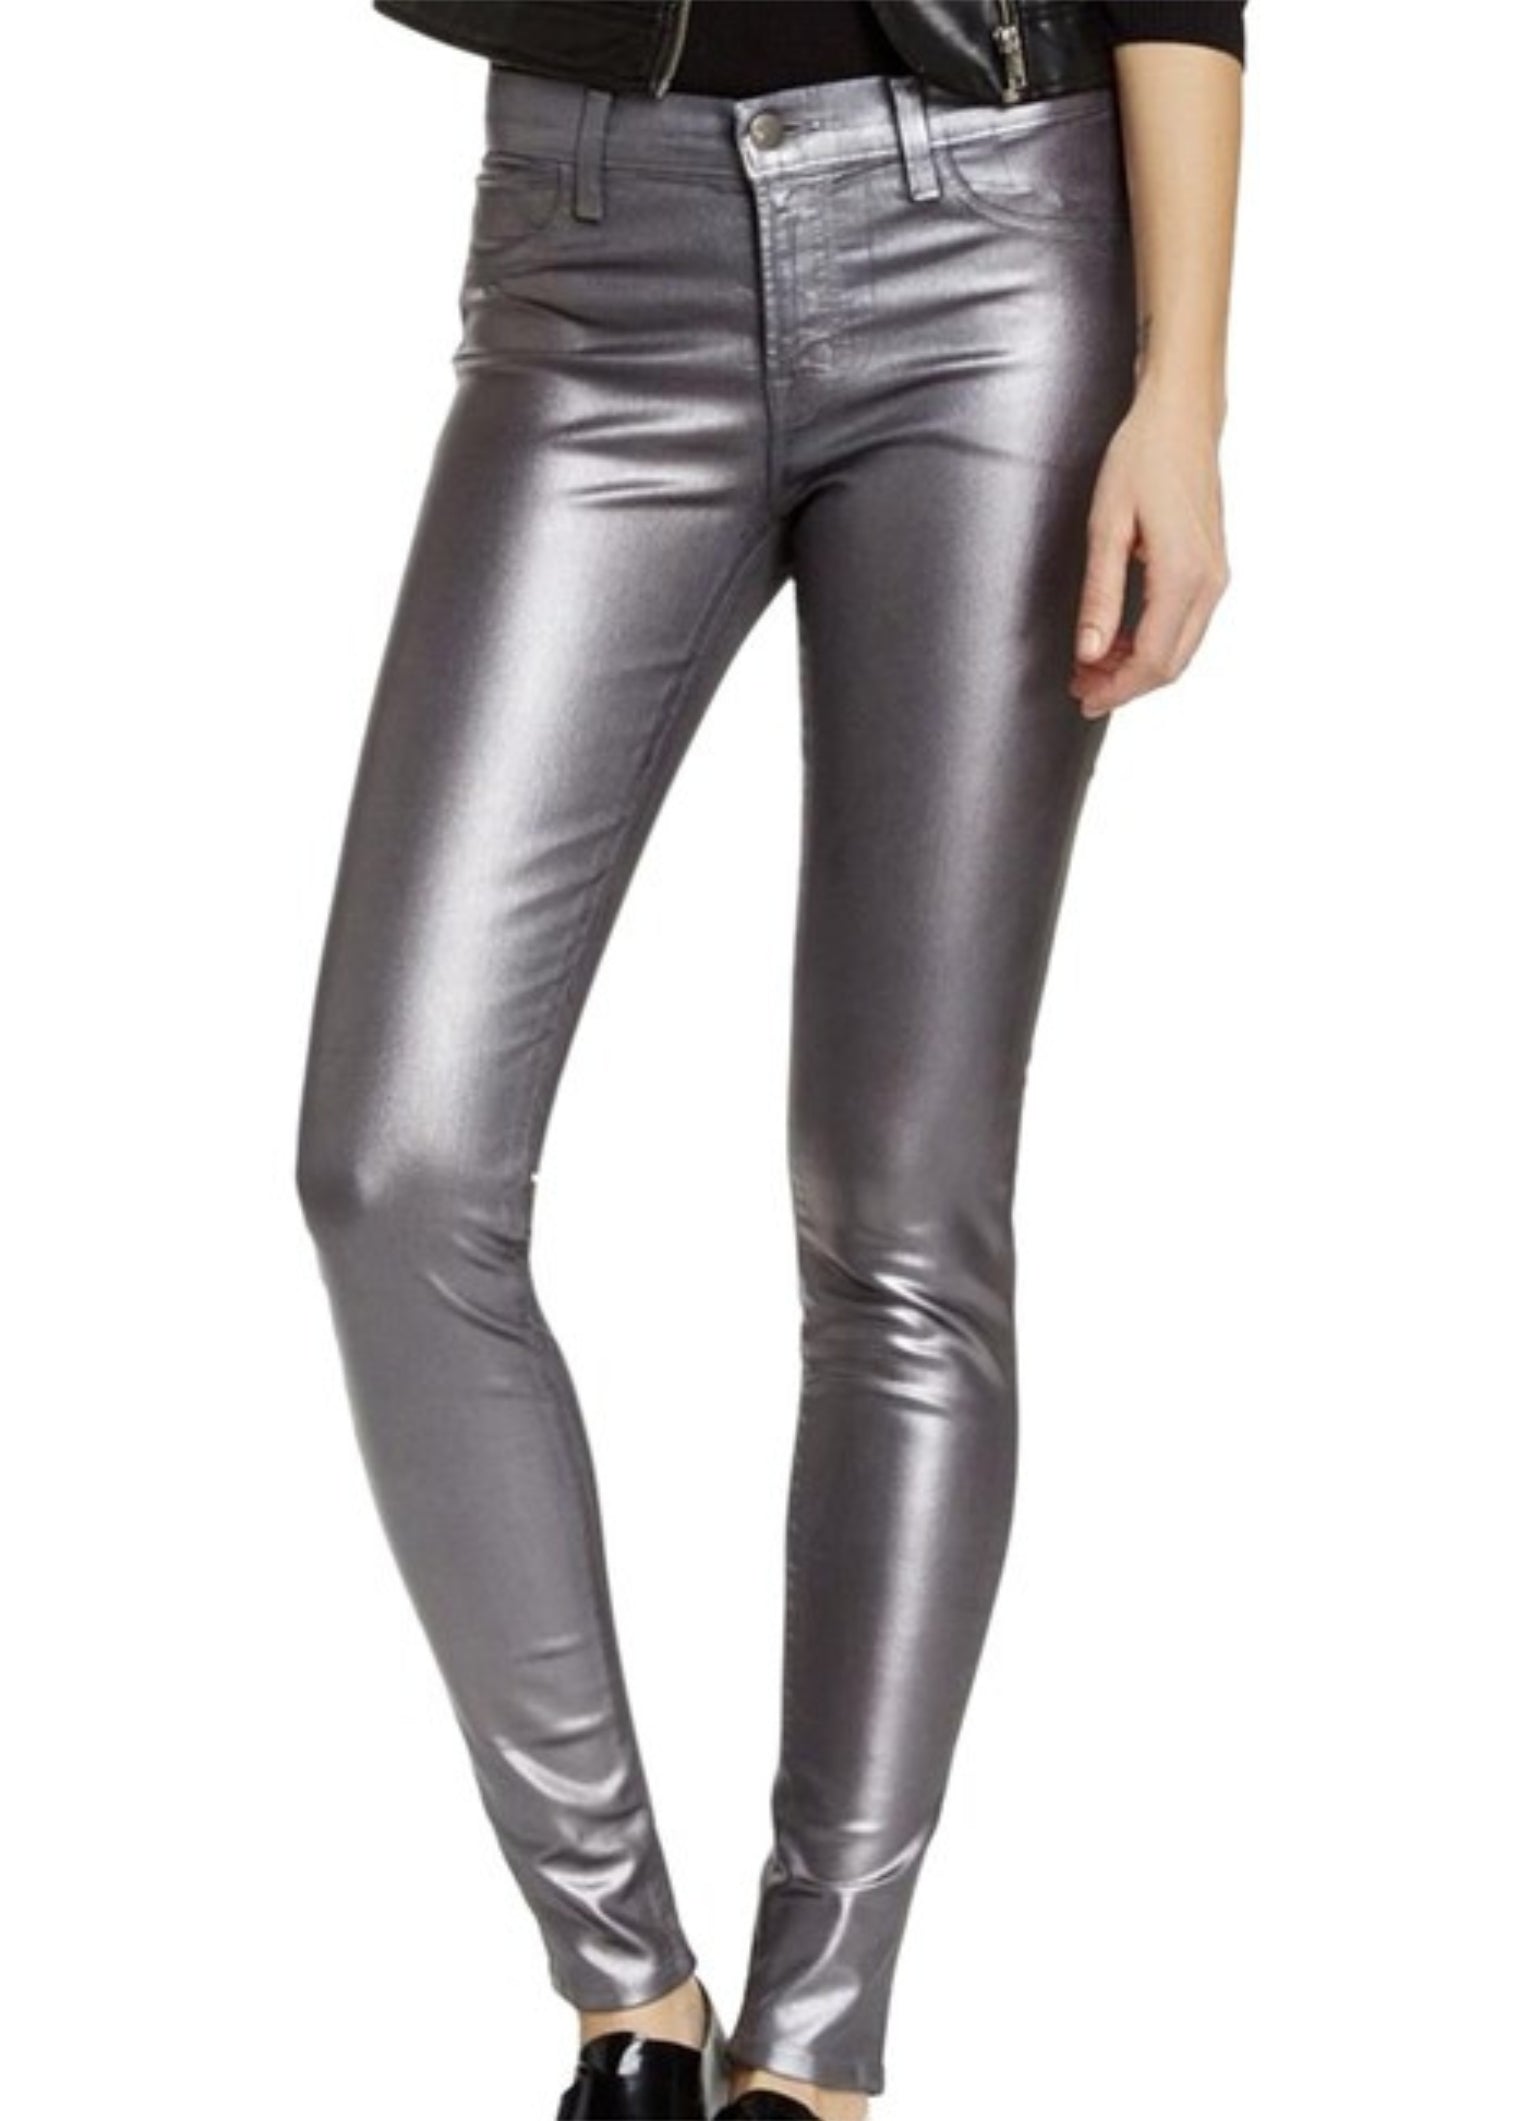 J Brand Gel Pewter Jeans - Second Chance